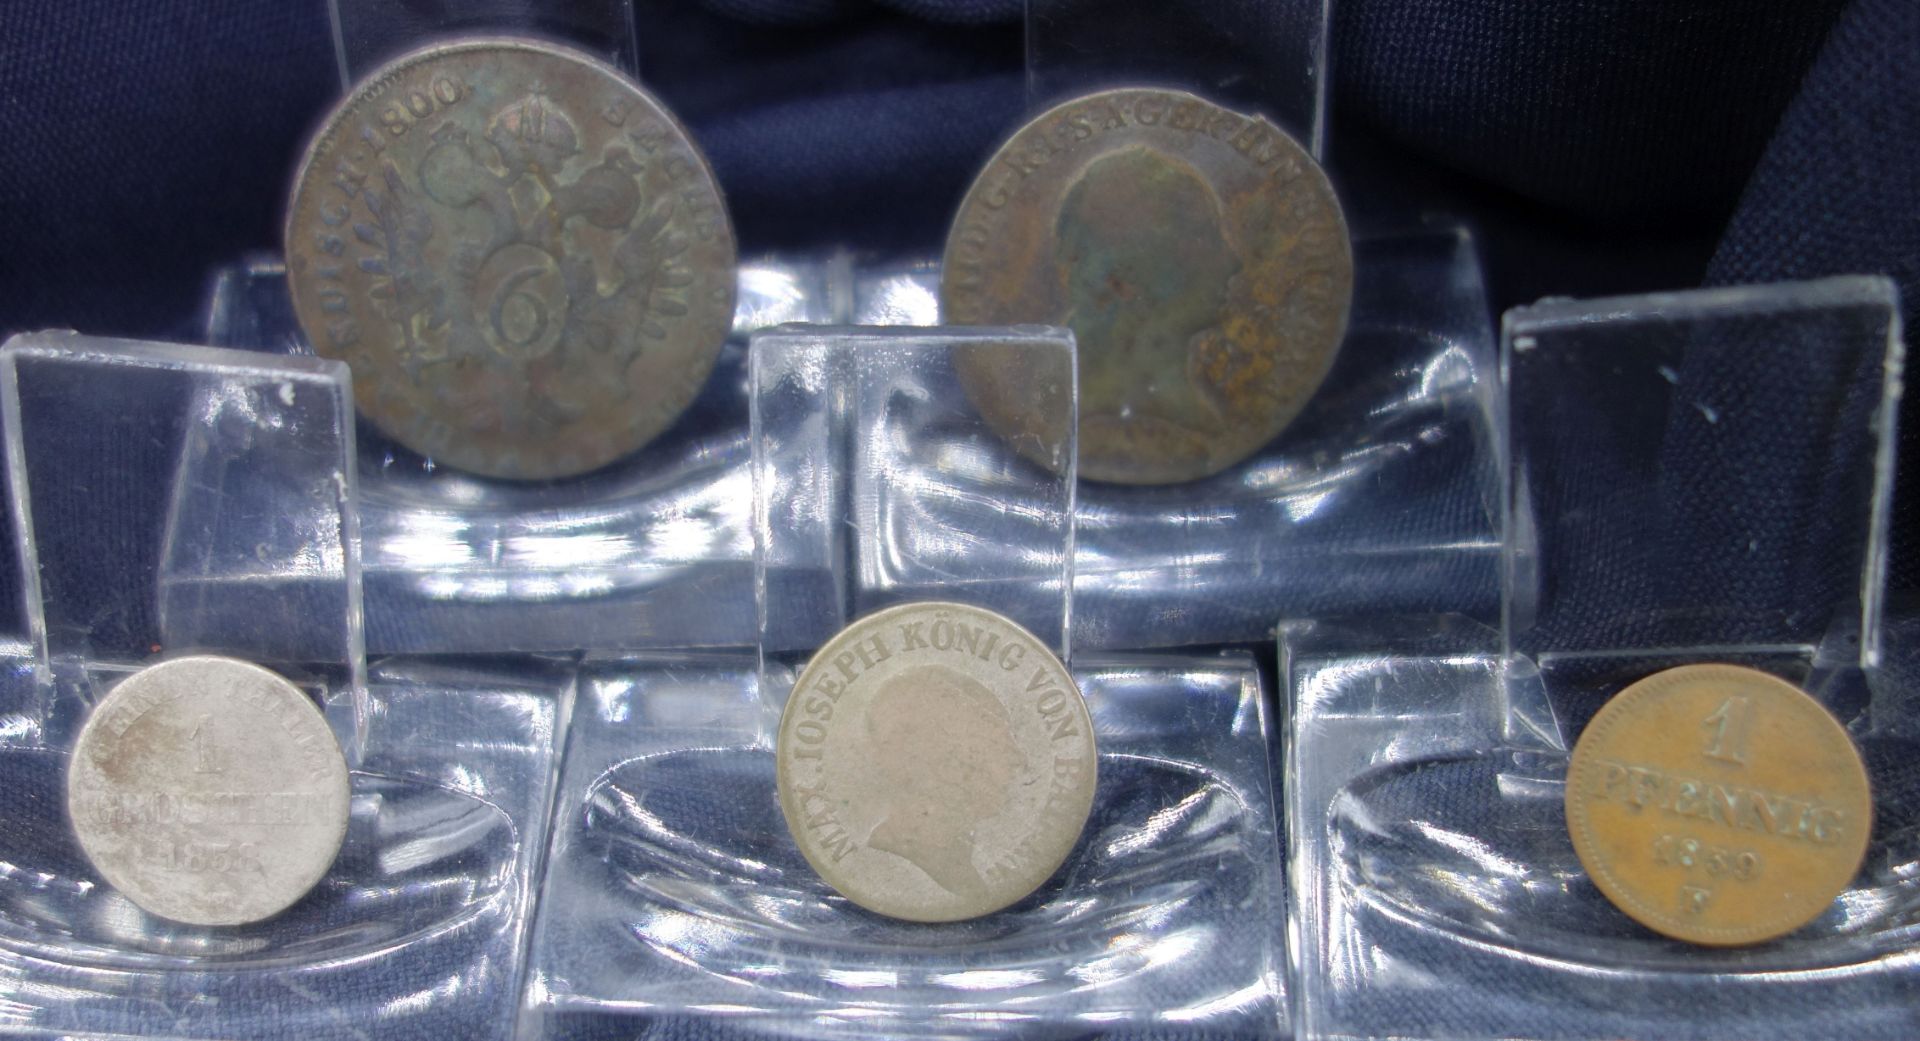 FIVE COINS FROM 1800-1859